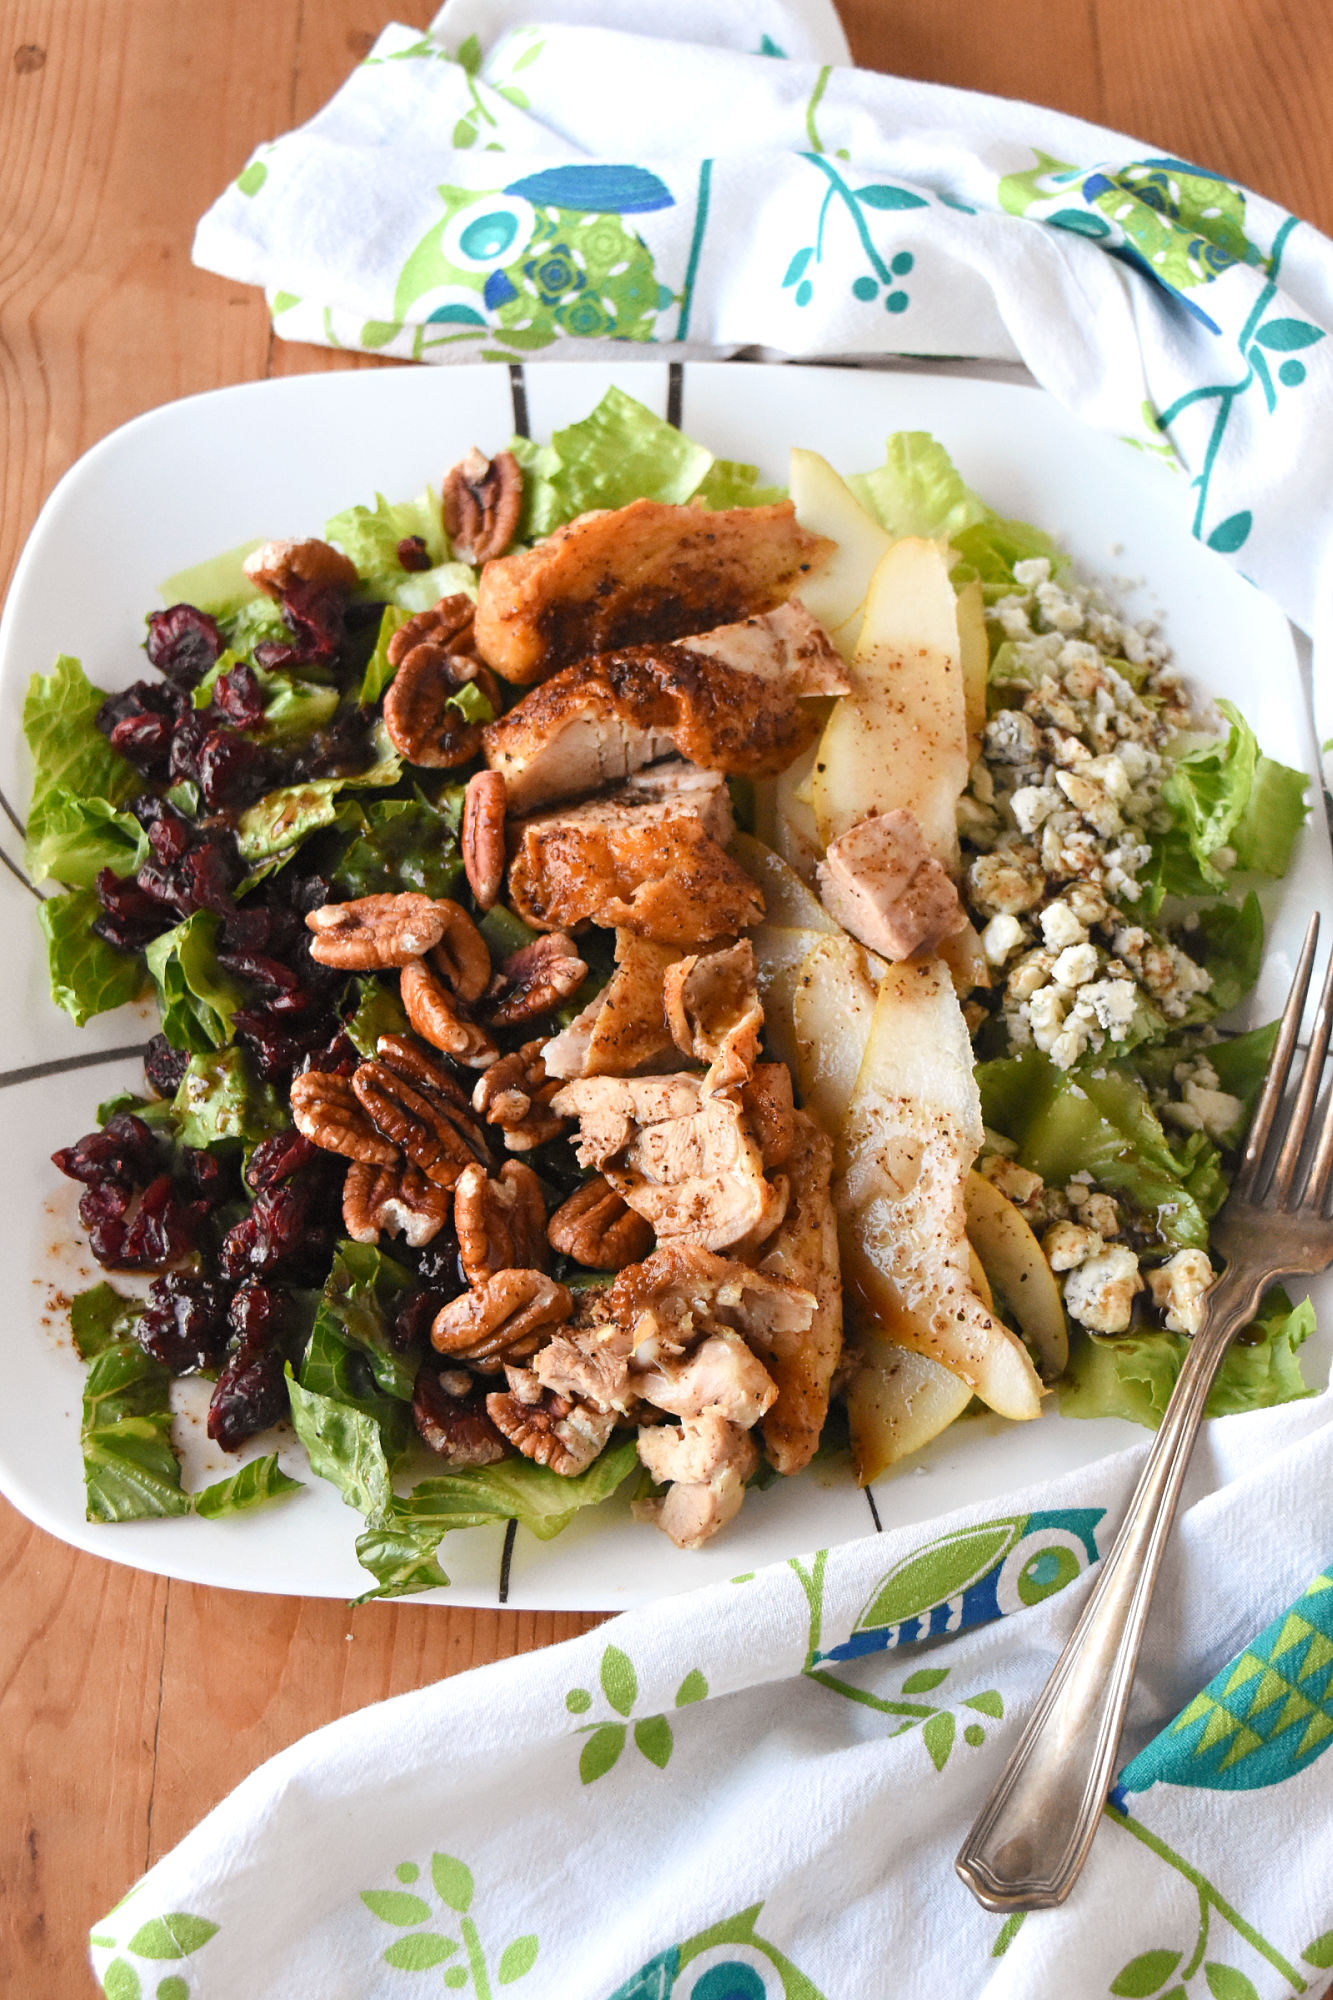 Autumn Chicken Cobb Salad has all the fall flavors. From sweet and crisp pears to crunchy pecans, and sweet tart dried cranberries. It’s a hearty and delicious fall cobb salad.  #FallFlavors #cobbsalad #pears #USAPears